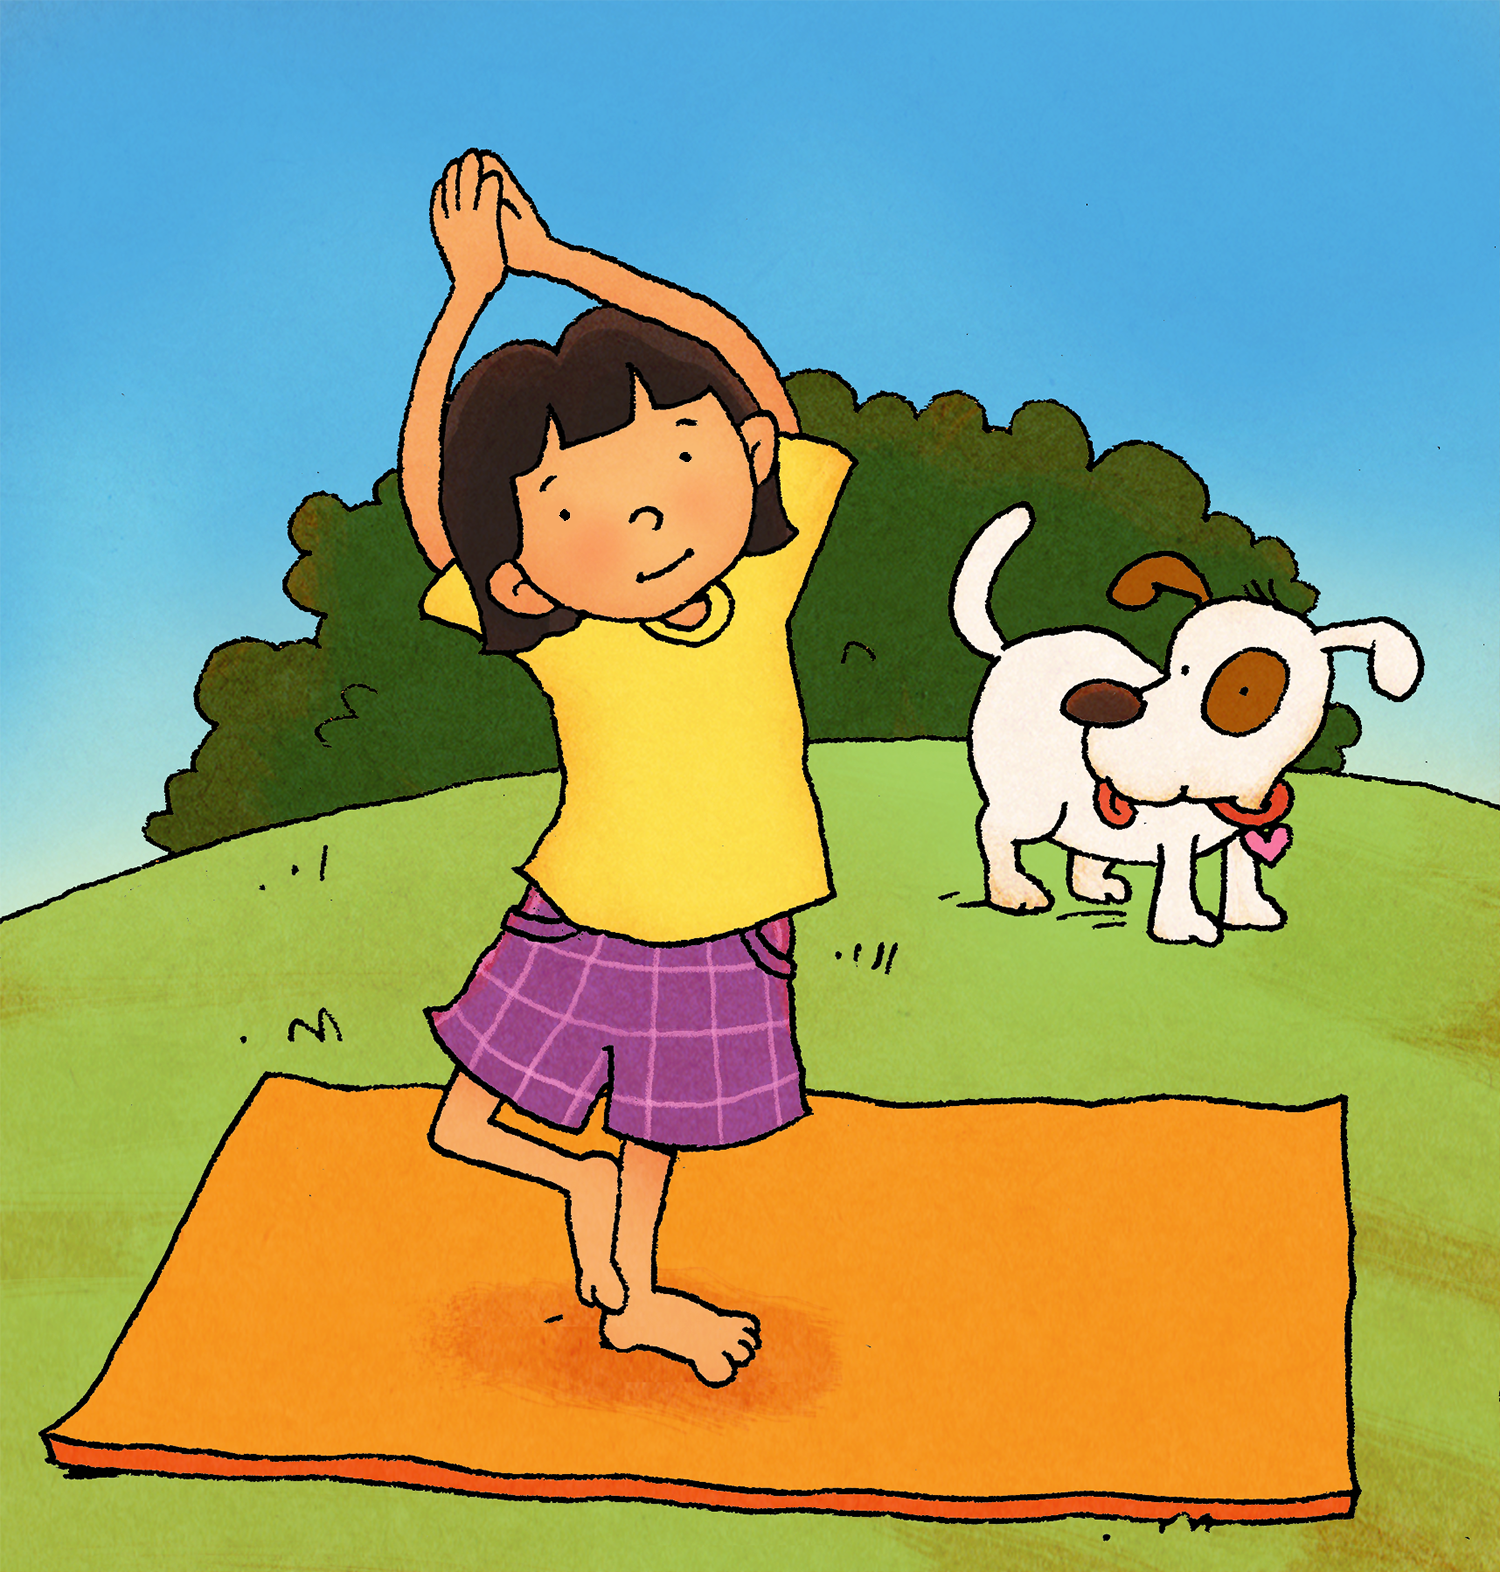 Child doing yoga with dog in background.